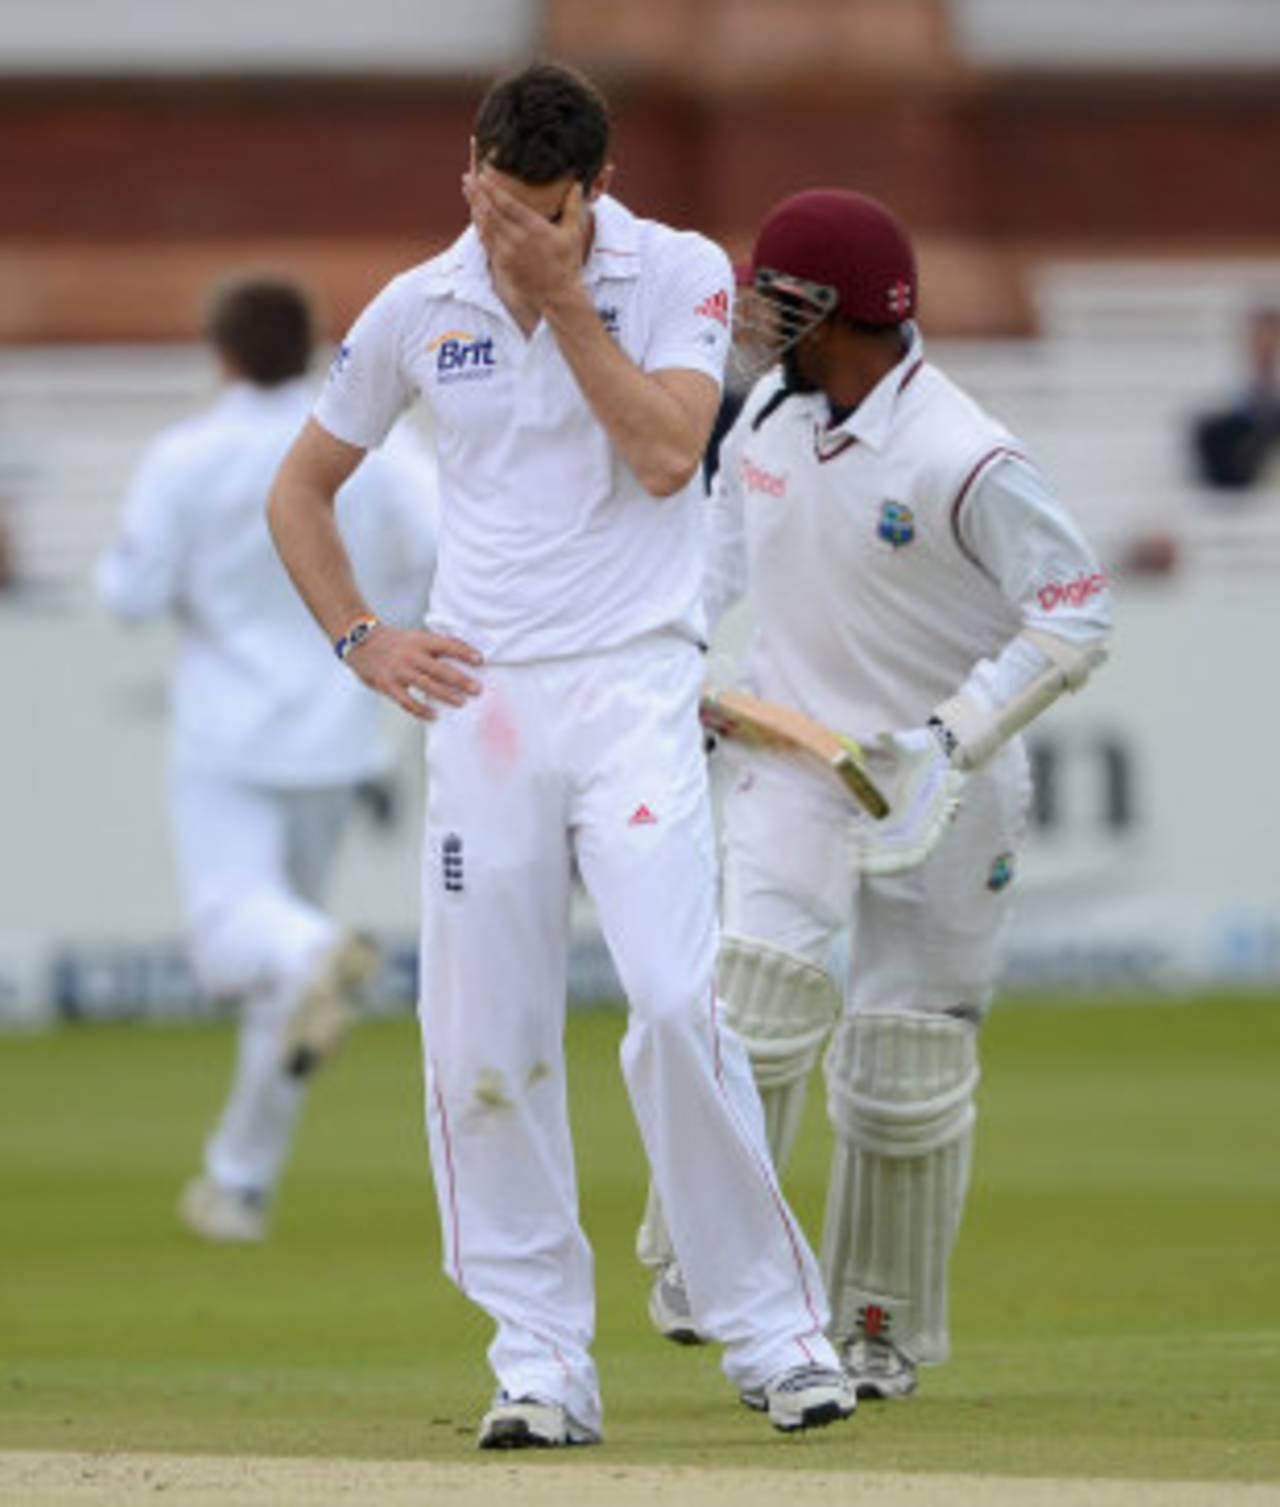 James Anderson can't believe his luck, England v West Indies, 1st Test, Lord's, 4th day, May 20, 2012